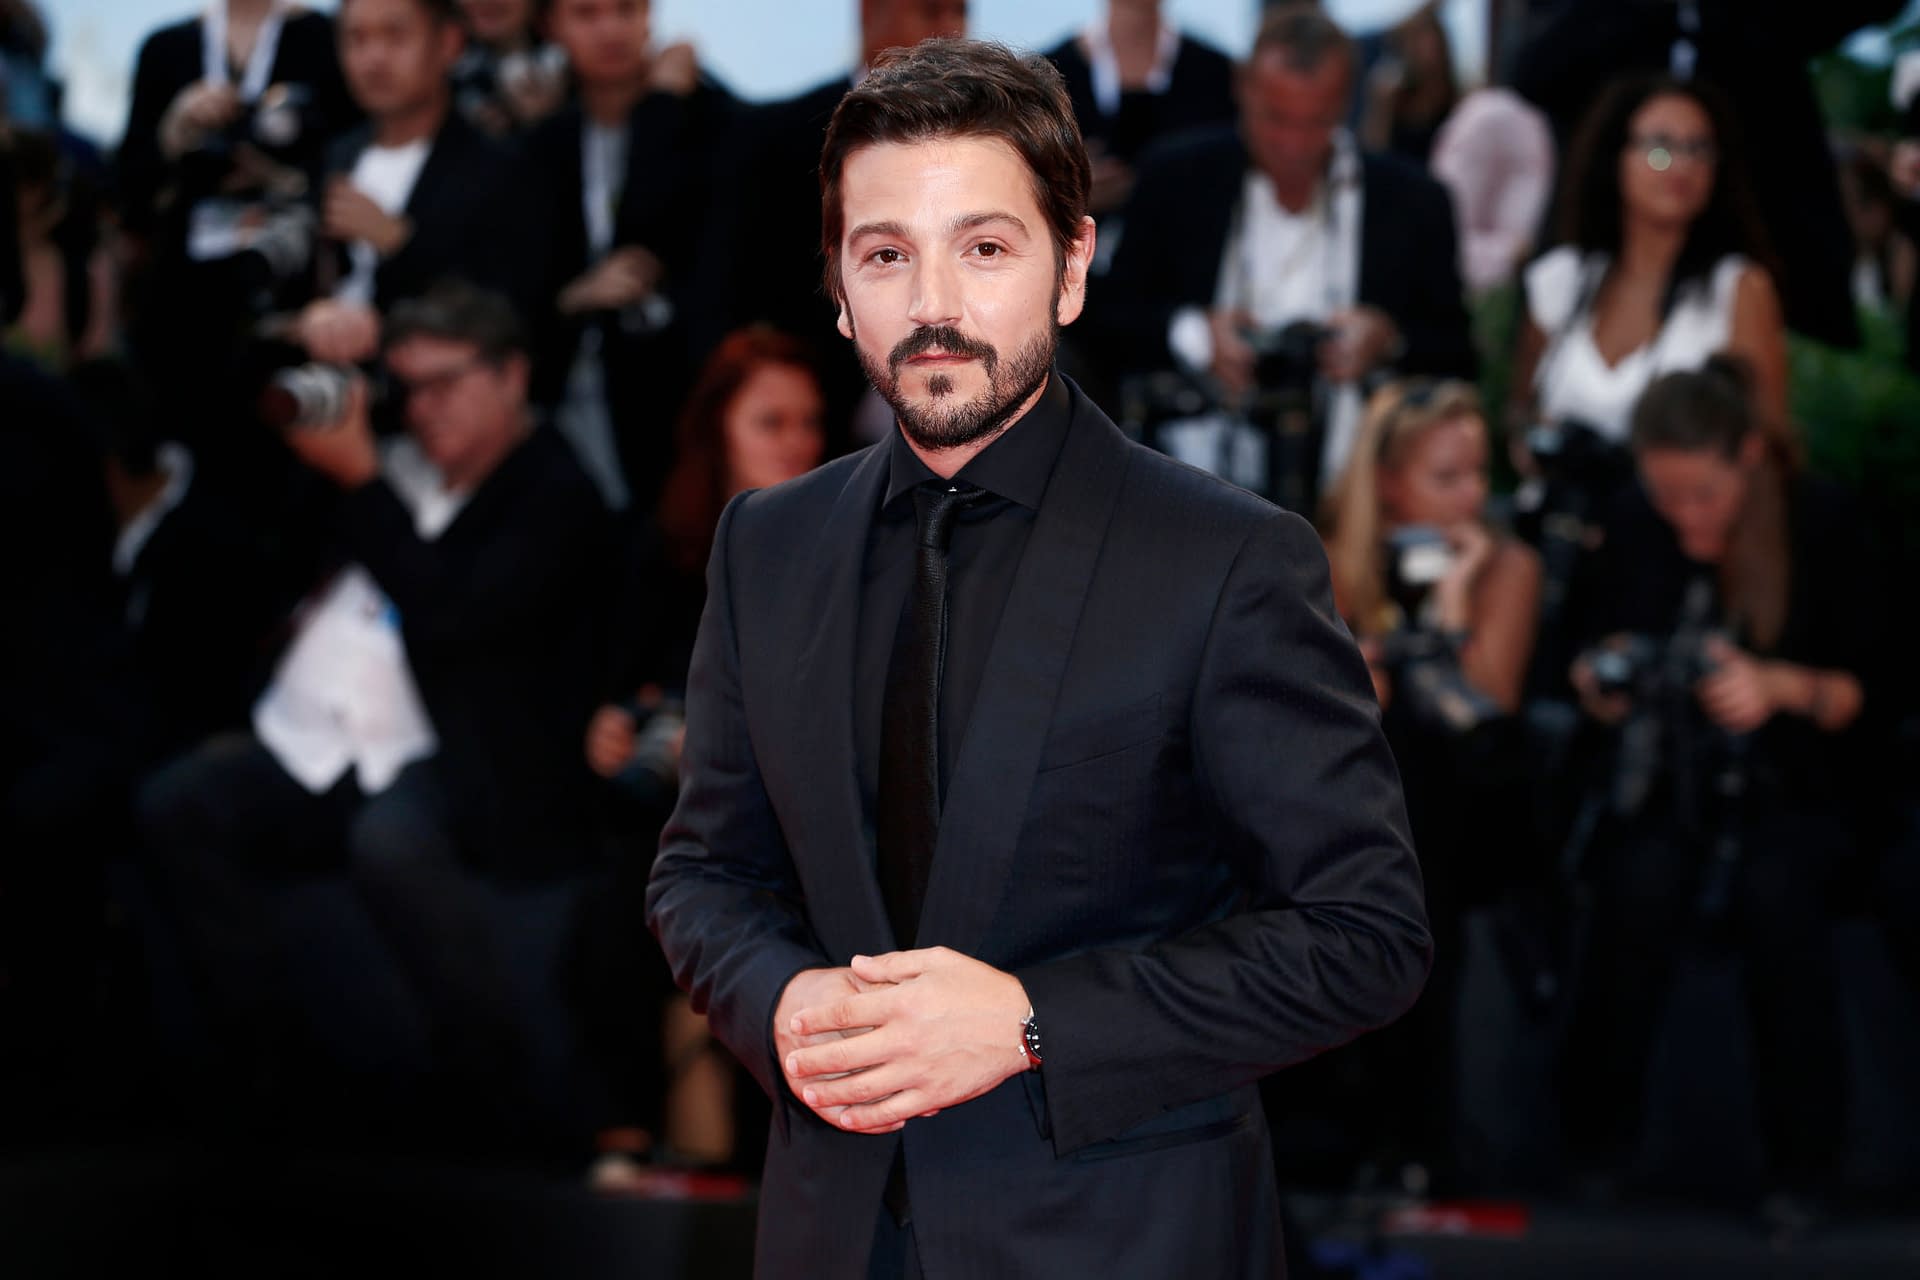 Diego Luna on Playing Cassian Andor for "Star Wars" Again